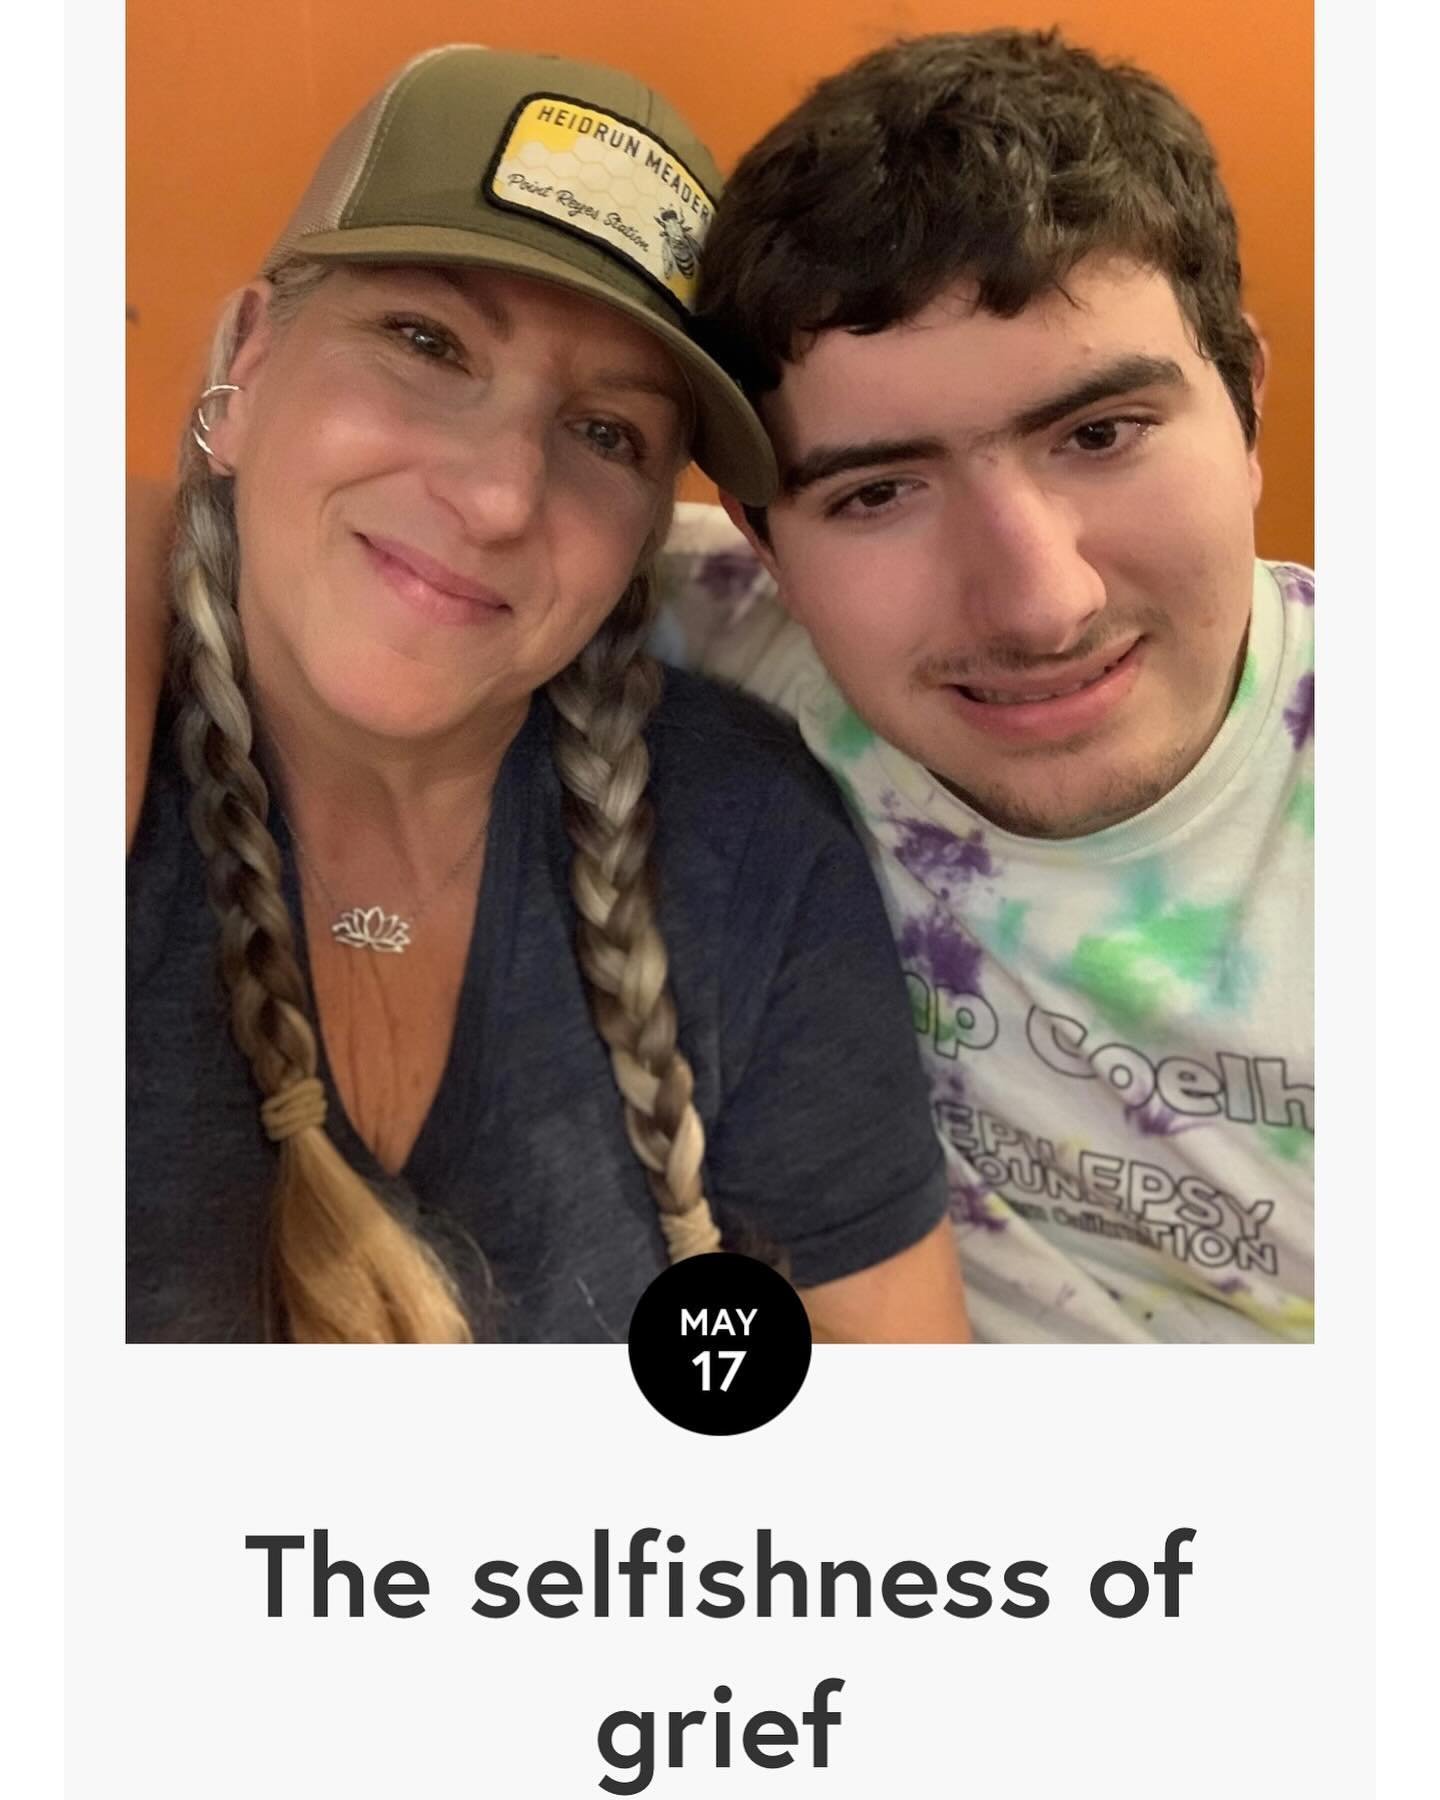 *NEW BLOG* The selfishness of grief (or the selflessness of caregiving)

Karen Valentine (@fourvalentines) turned to advocacy alongside the unexpected role of medical caregiving when her son Levi was diagnosed with epilepsy. Then, last year, Levi, pa